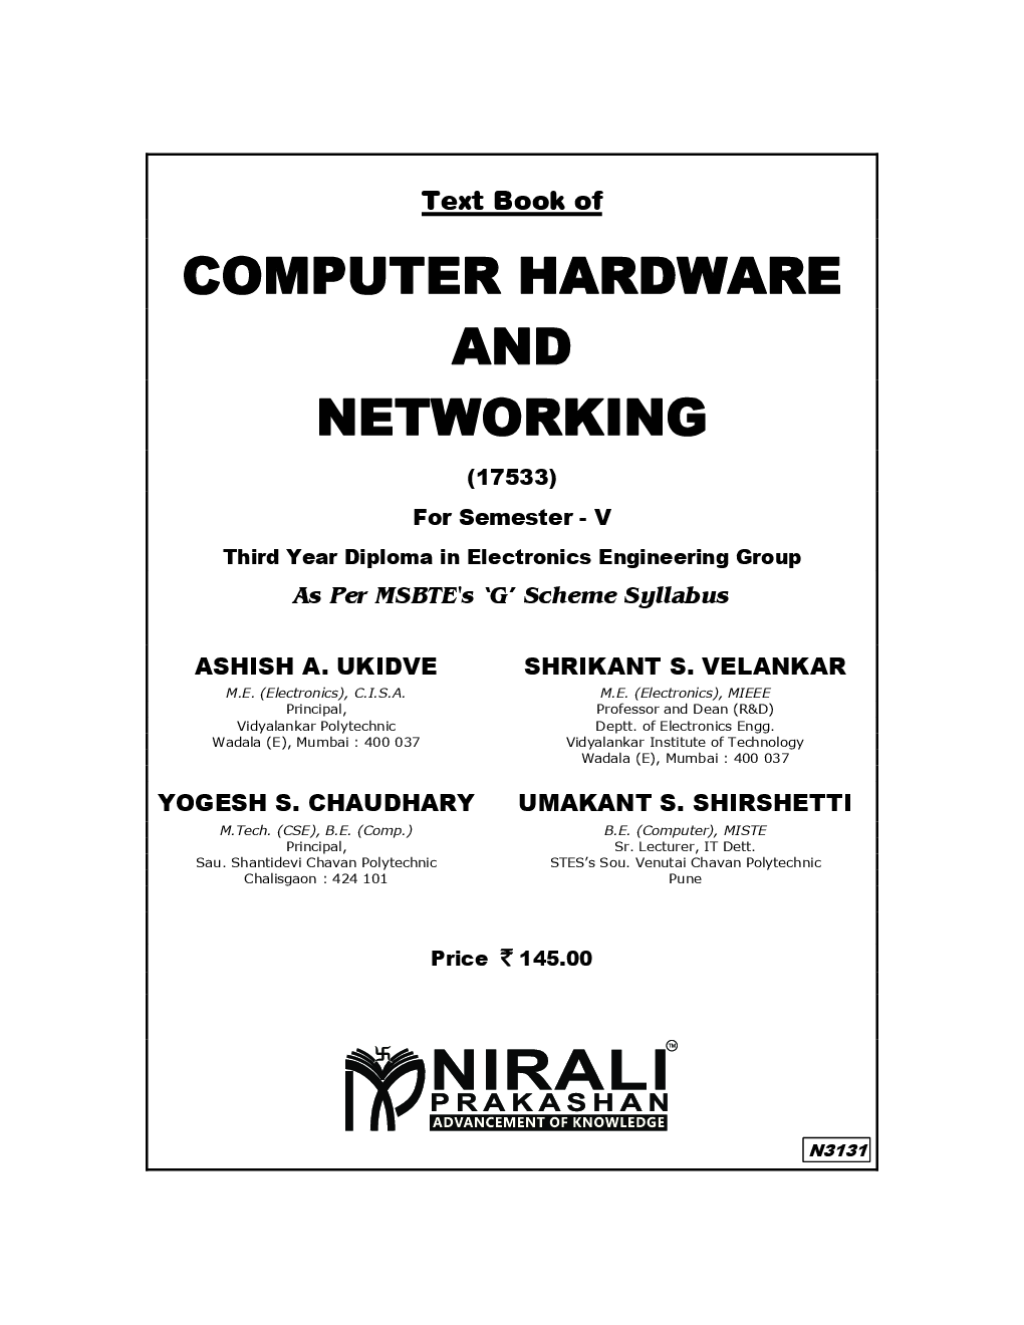 Picture of: Download Computer Hardware And Networking PDF Online by Ashish A